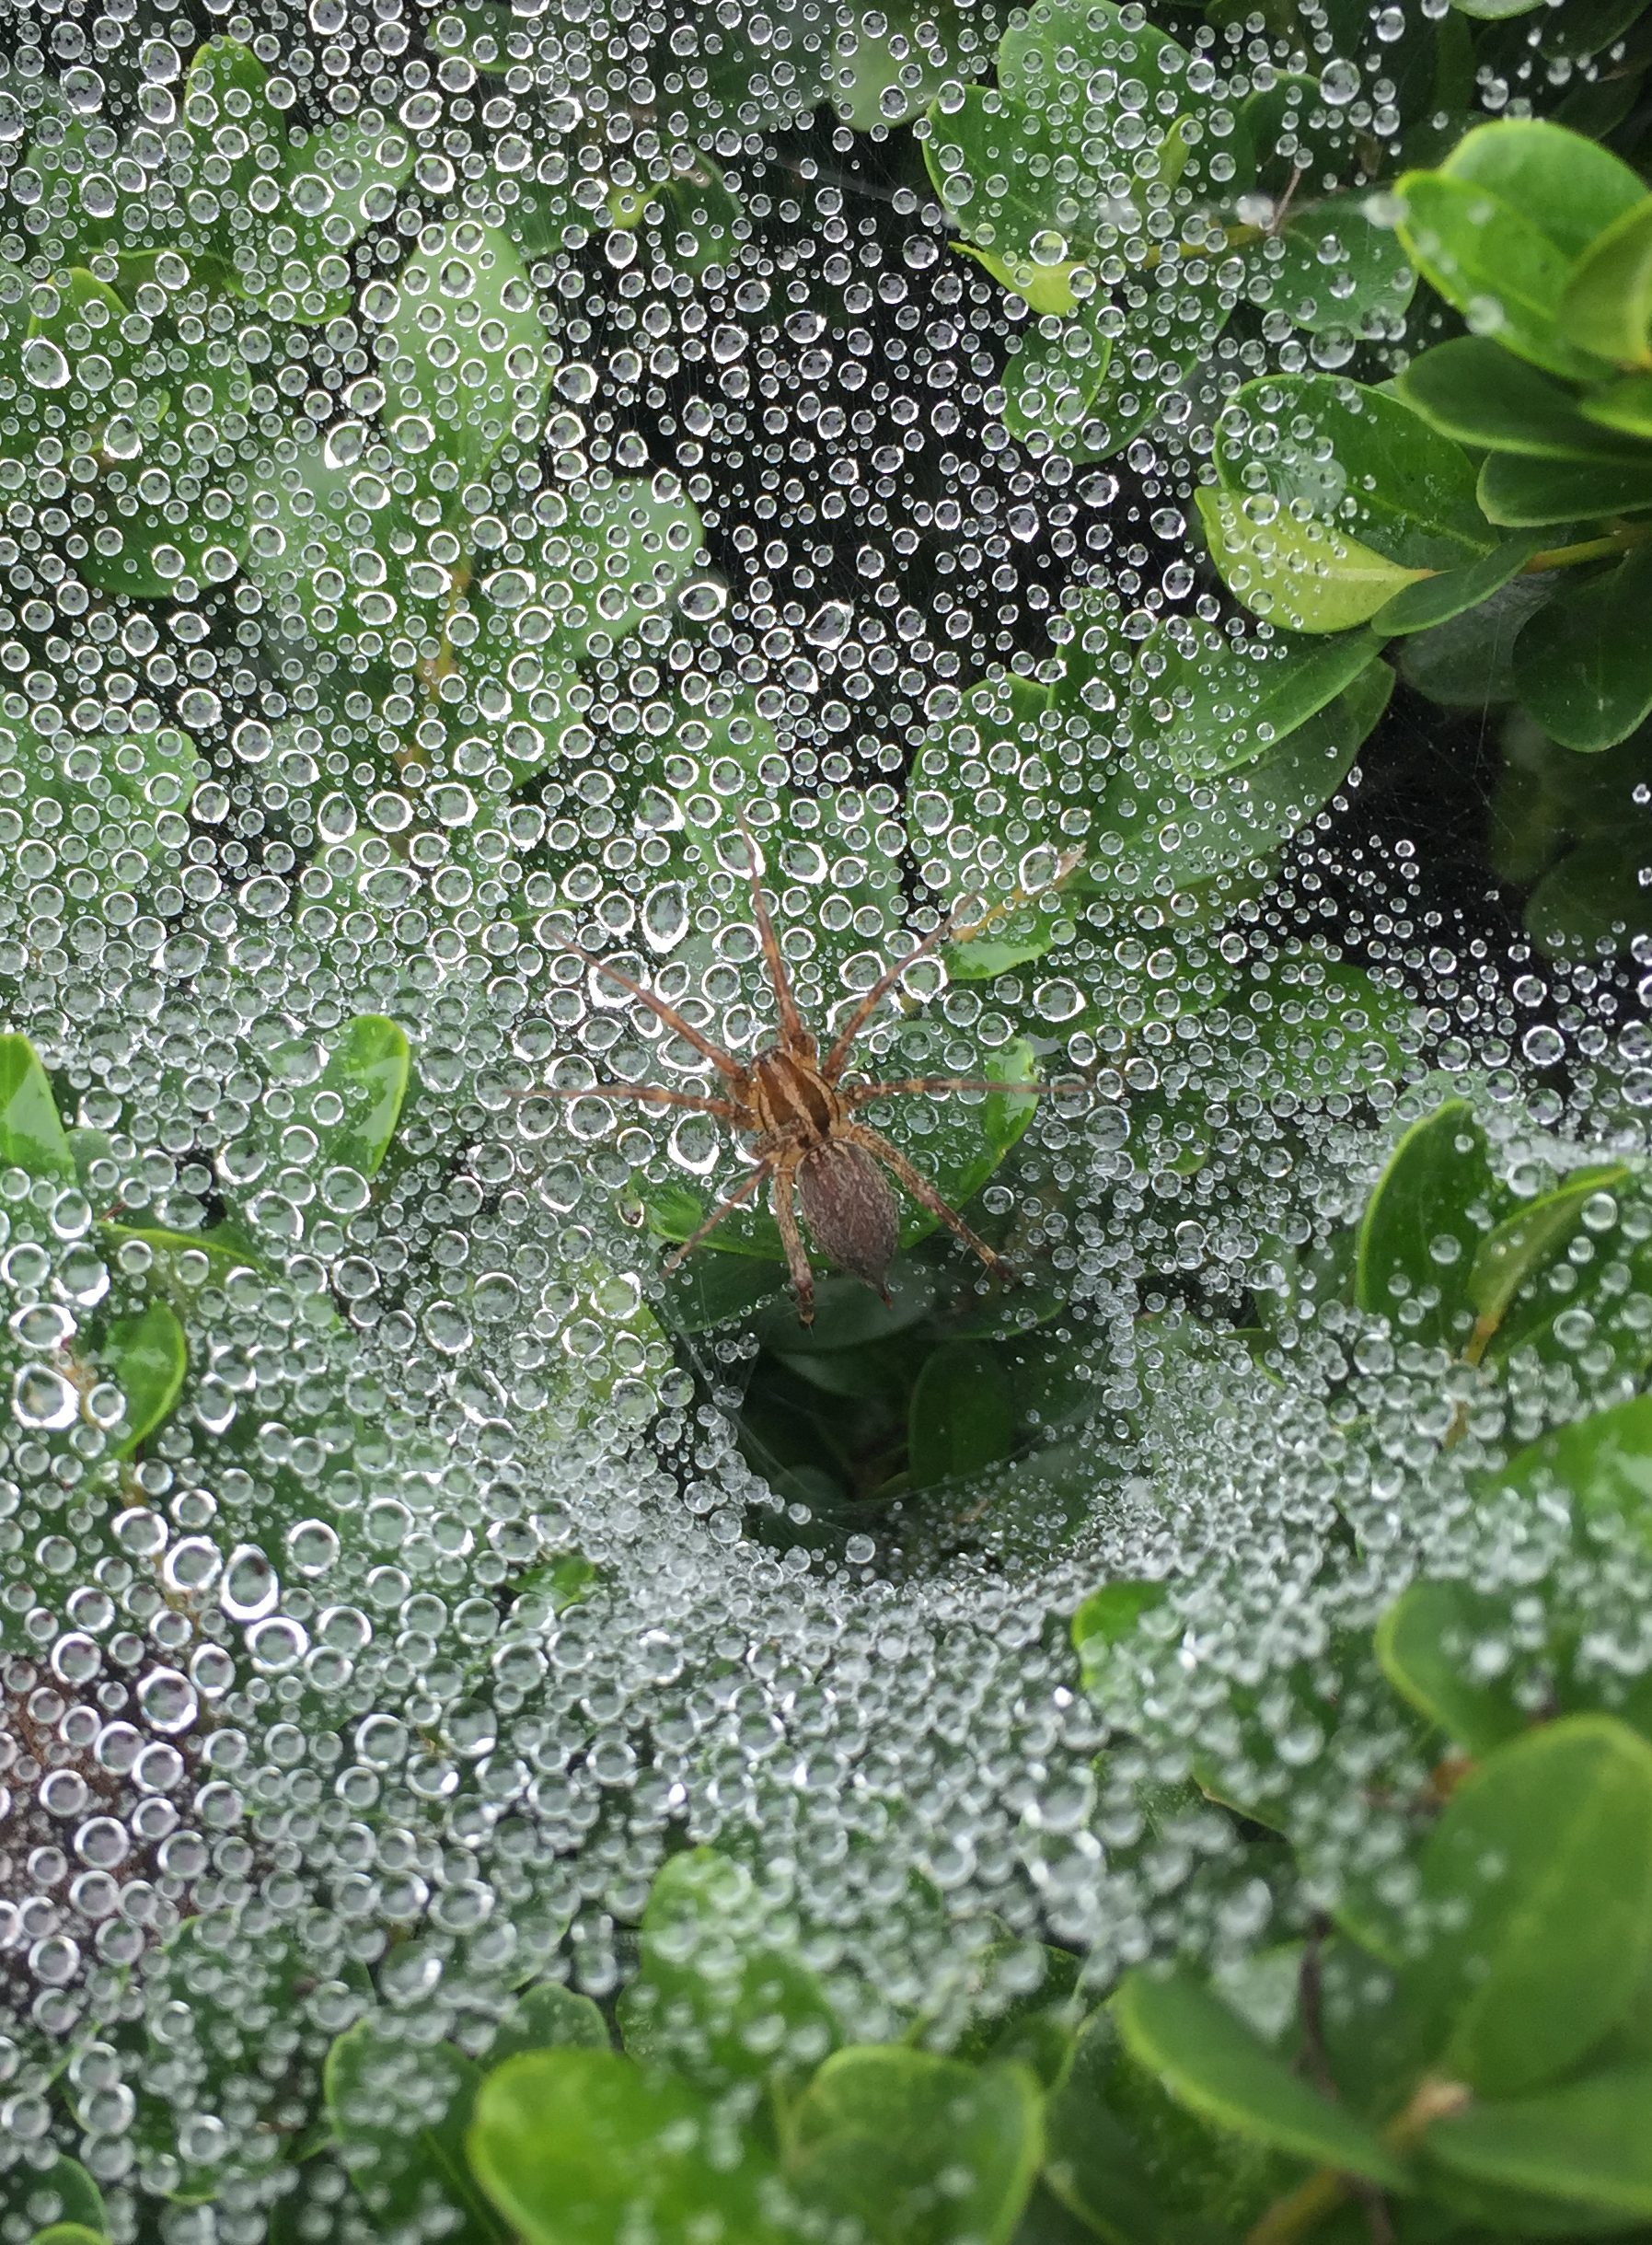 Spider near its web tunnel, on a web that is holding drops of dew.